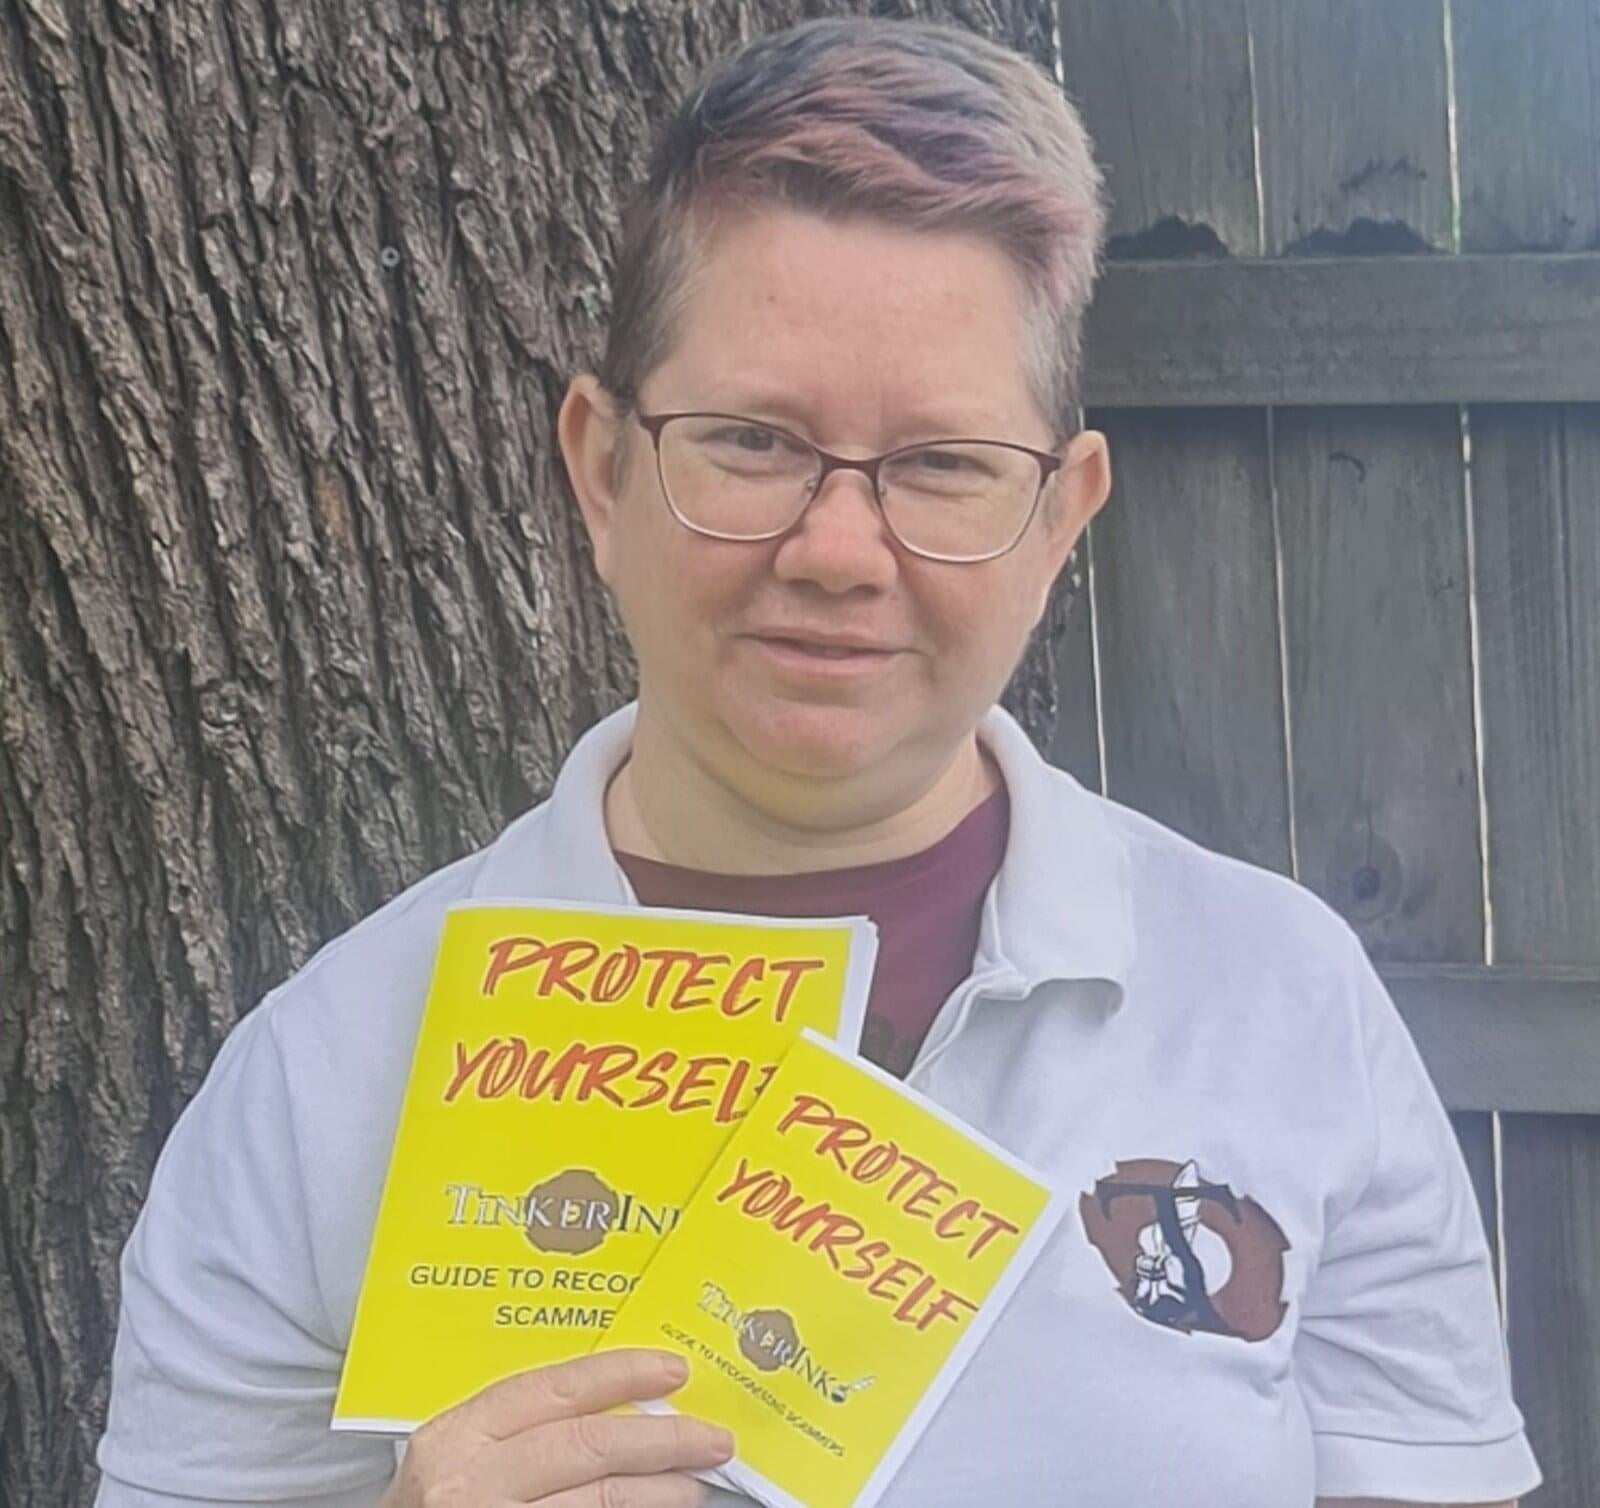 Image of Kristine Sihto, Documentation Specialist at TinkerInk and author of Protect Yourself: TinkerInk Guide to Recognising Scammers, holding our new guide in both regular and large-text versions.